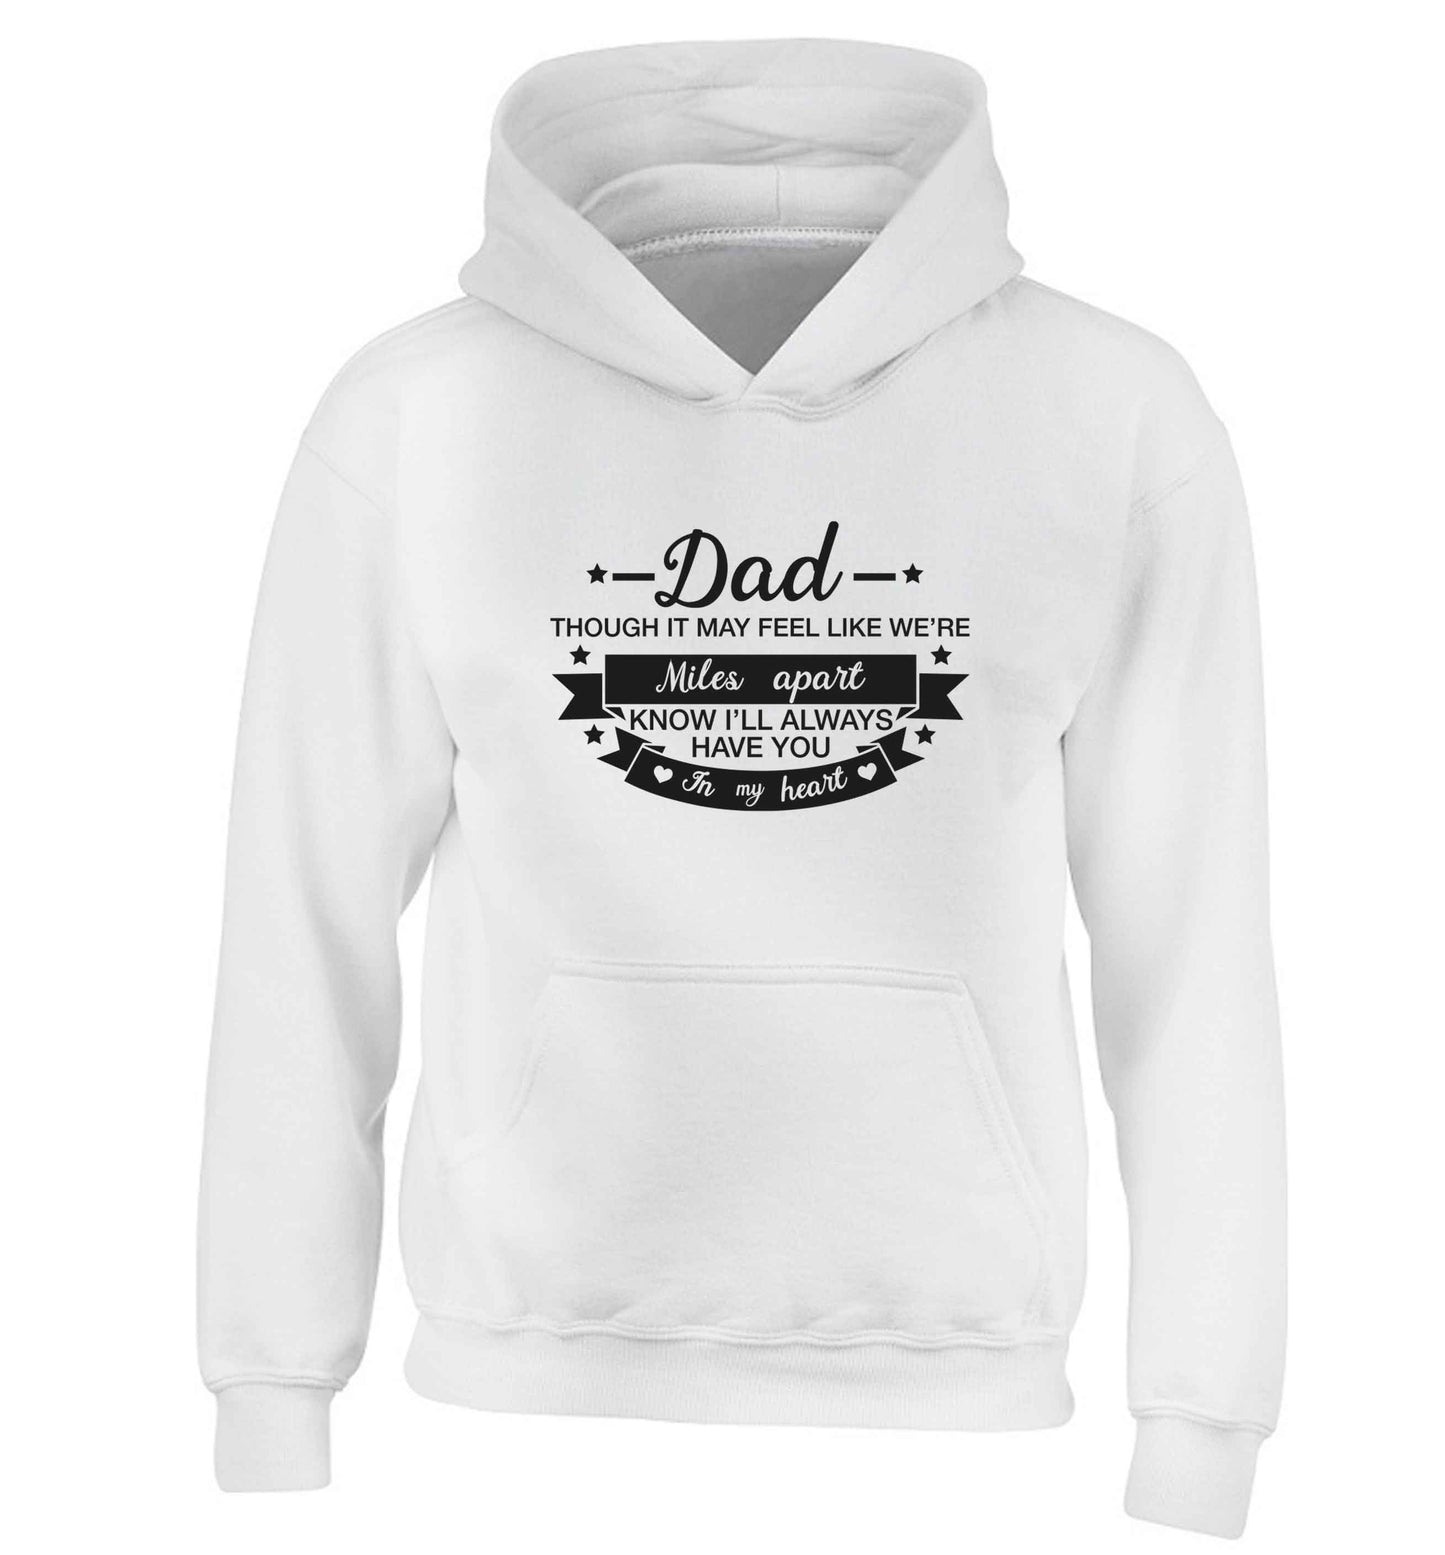 Dad though it may feel like we're miles apart know I'll always have you in my heart children's white hoodie 12-13 Years